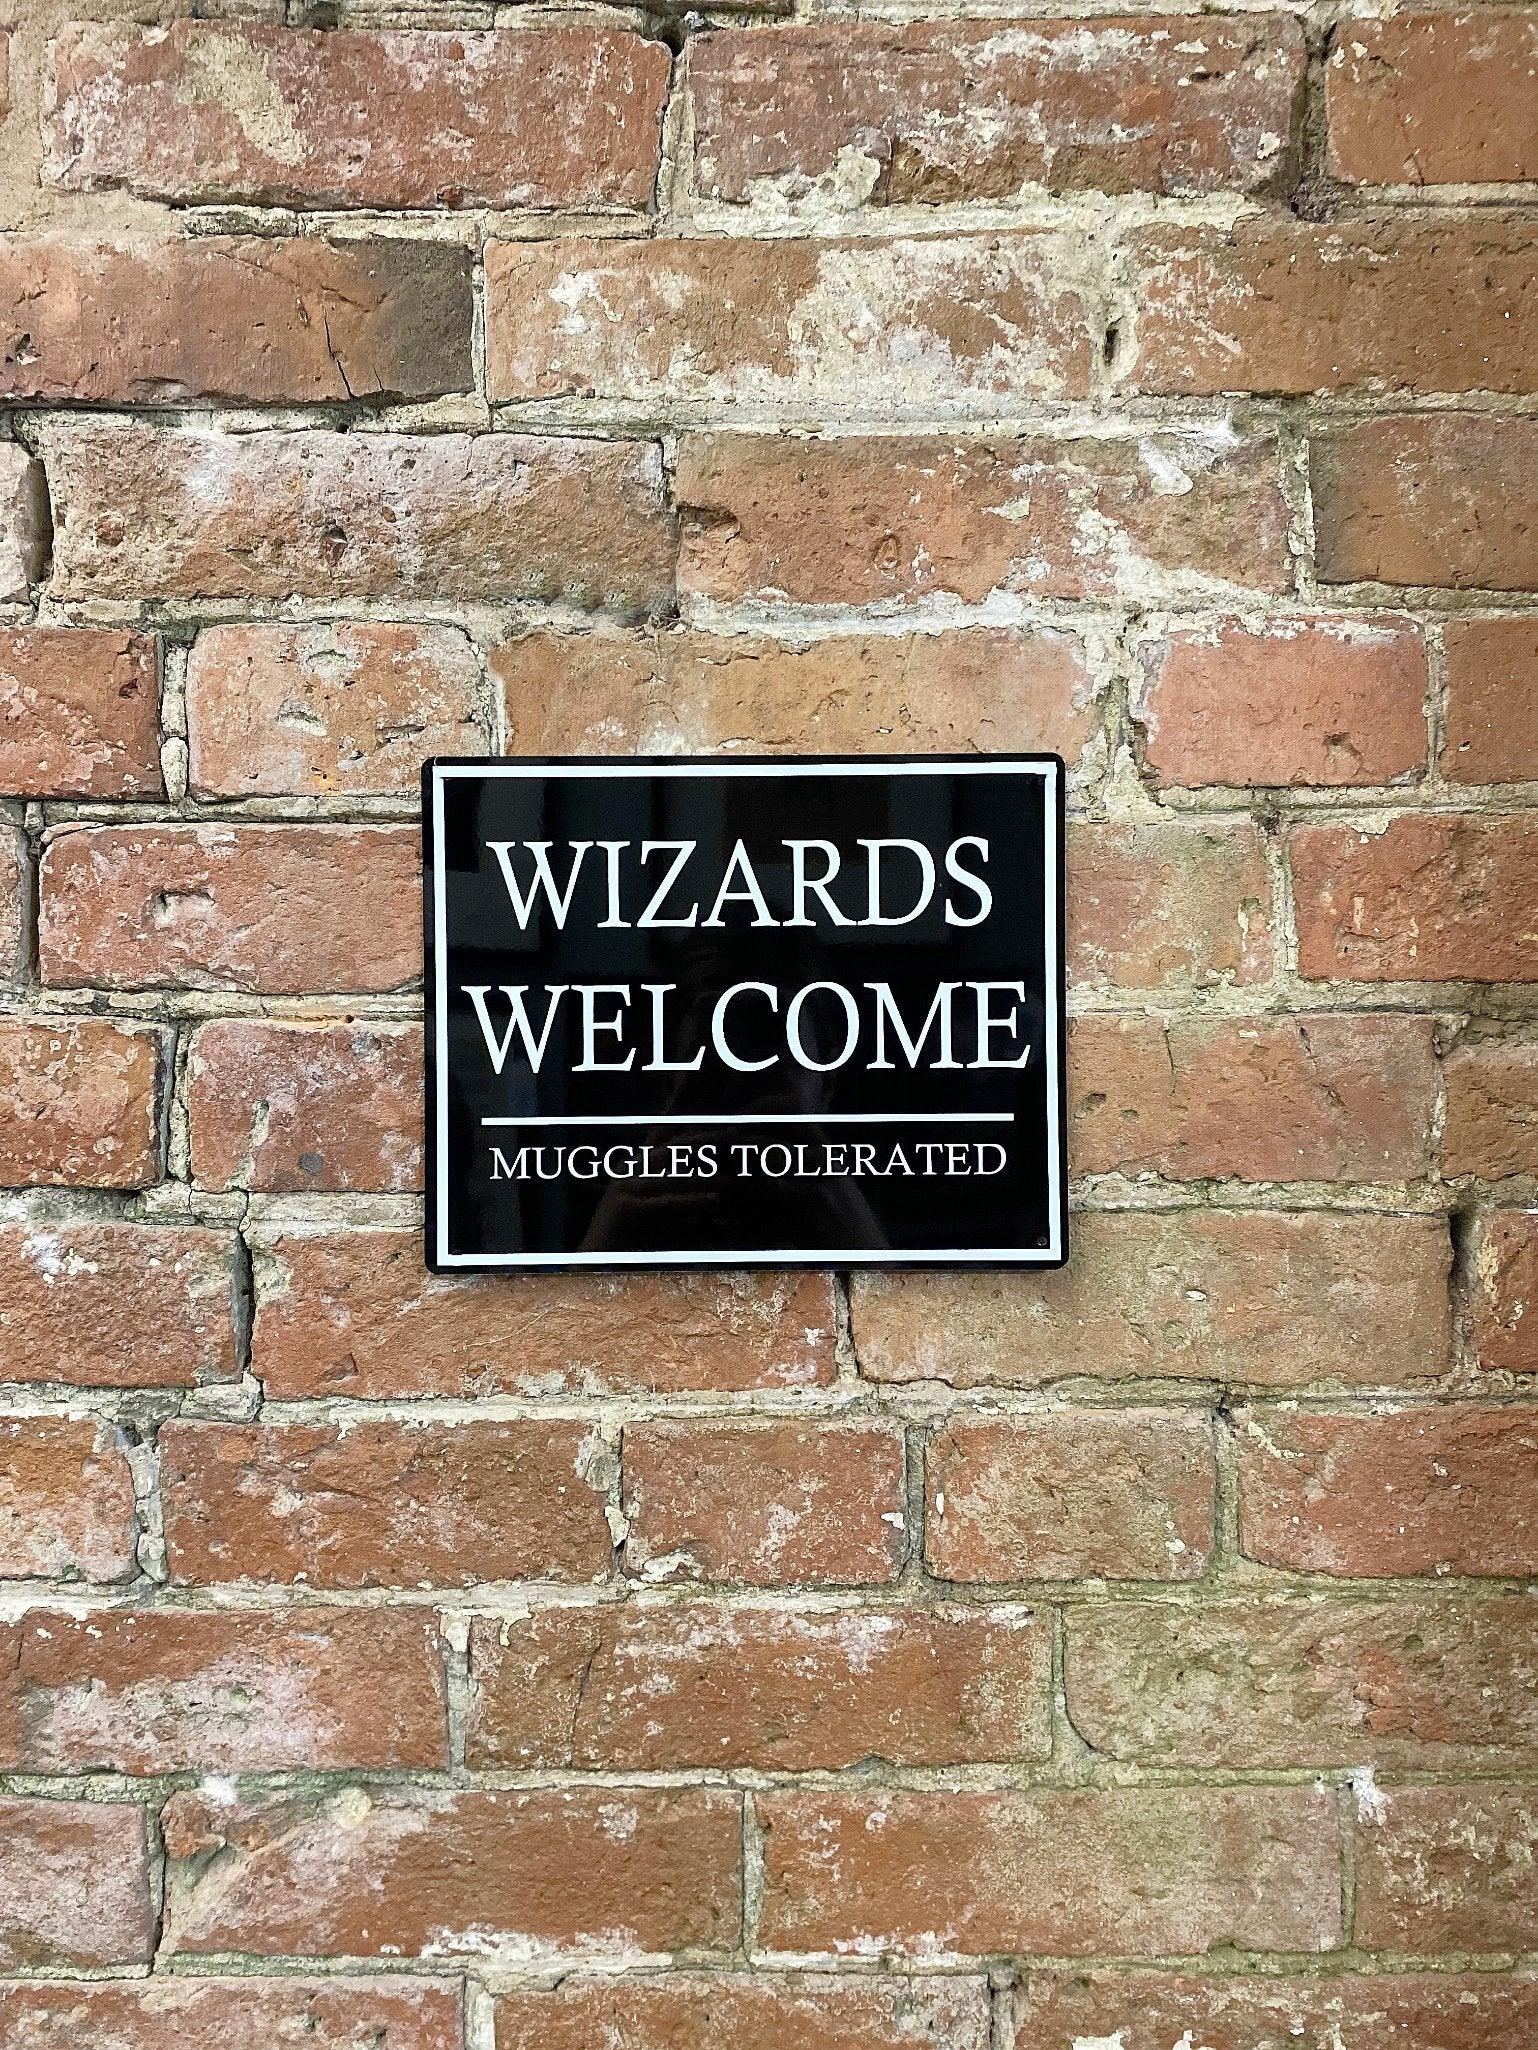 View Metal Wall Sign Wizards Welcome Muggles Tolerated information